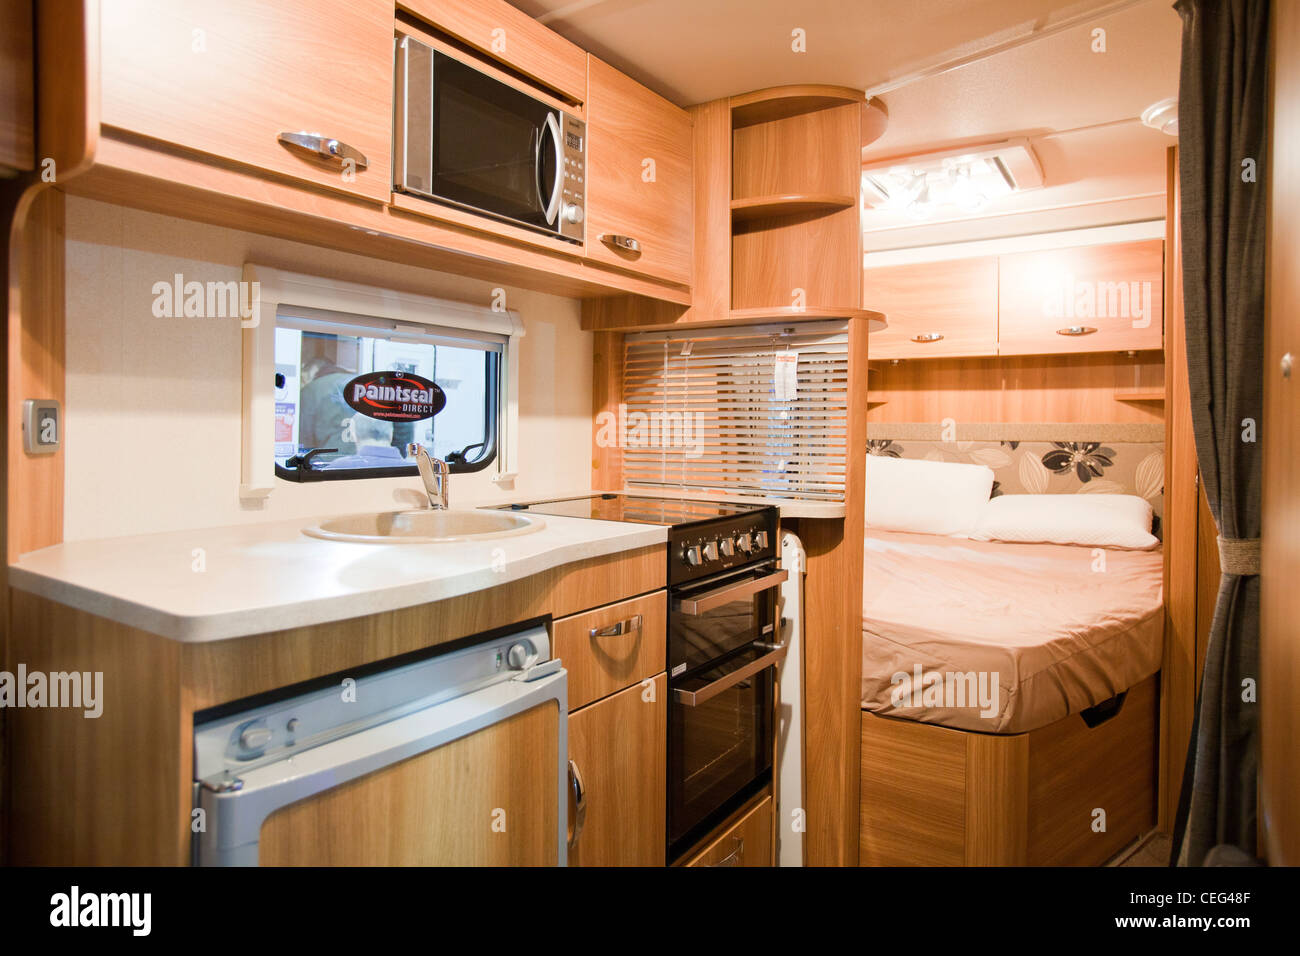 A caravan interior at the Caravan and motor home show at Event City in Manchester, UK. Stock Photo